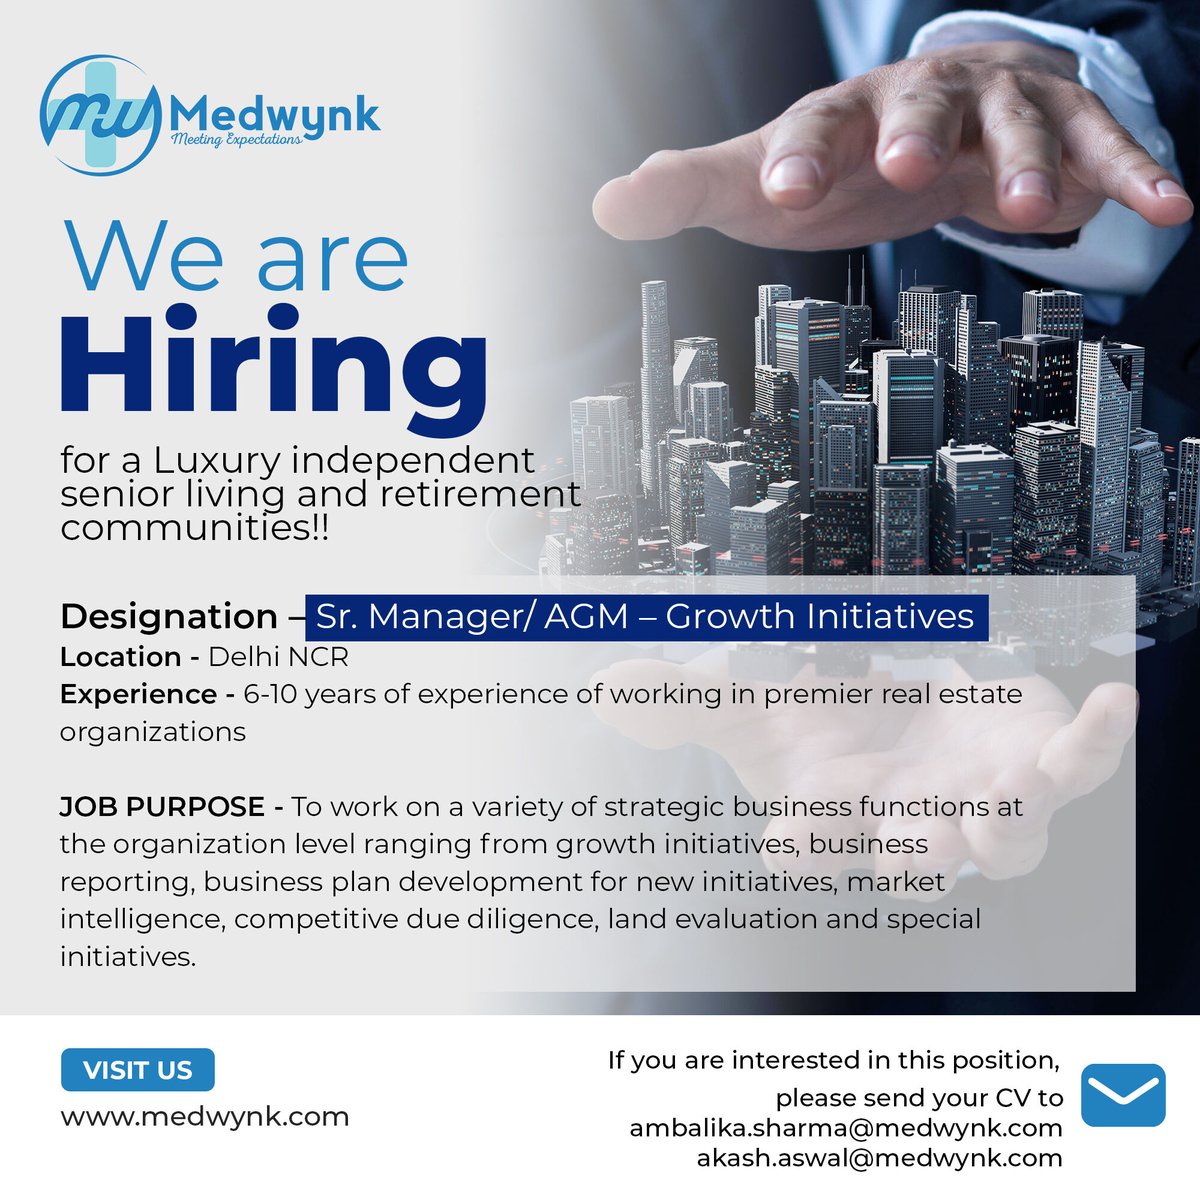 We are hiring for a Luxury independent senior living and retirement community!!

Connect for more info at akash.aswal@medwynk.com

#medwynk #corporategrowth #corporatestrategy #corporatefinance #realestate #valuation #businessgrowthstrategy